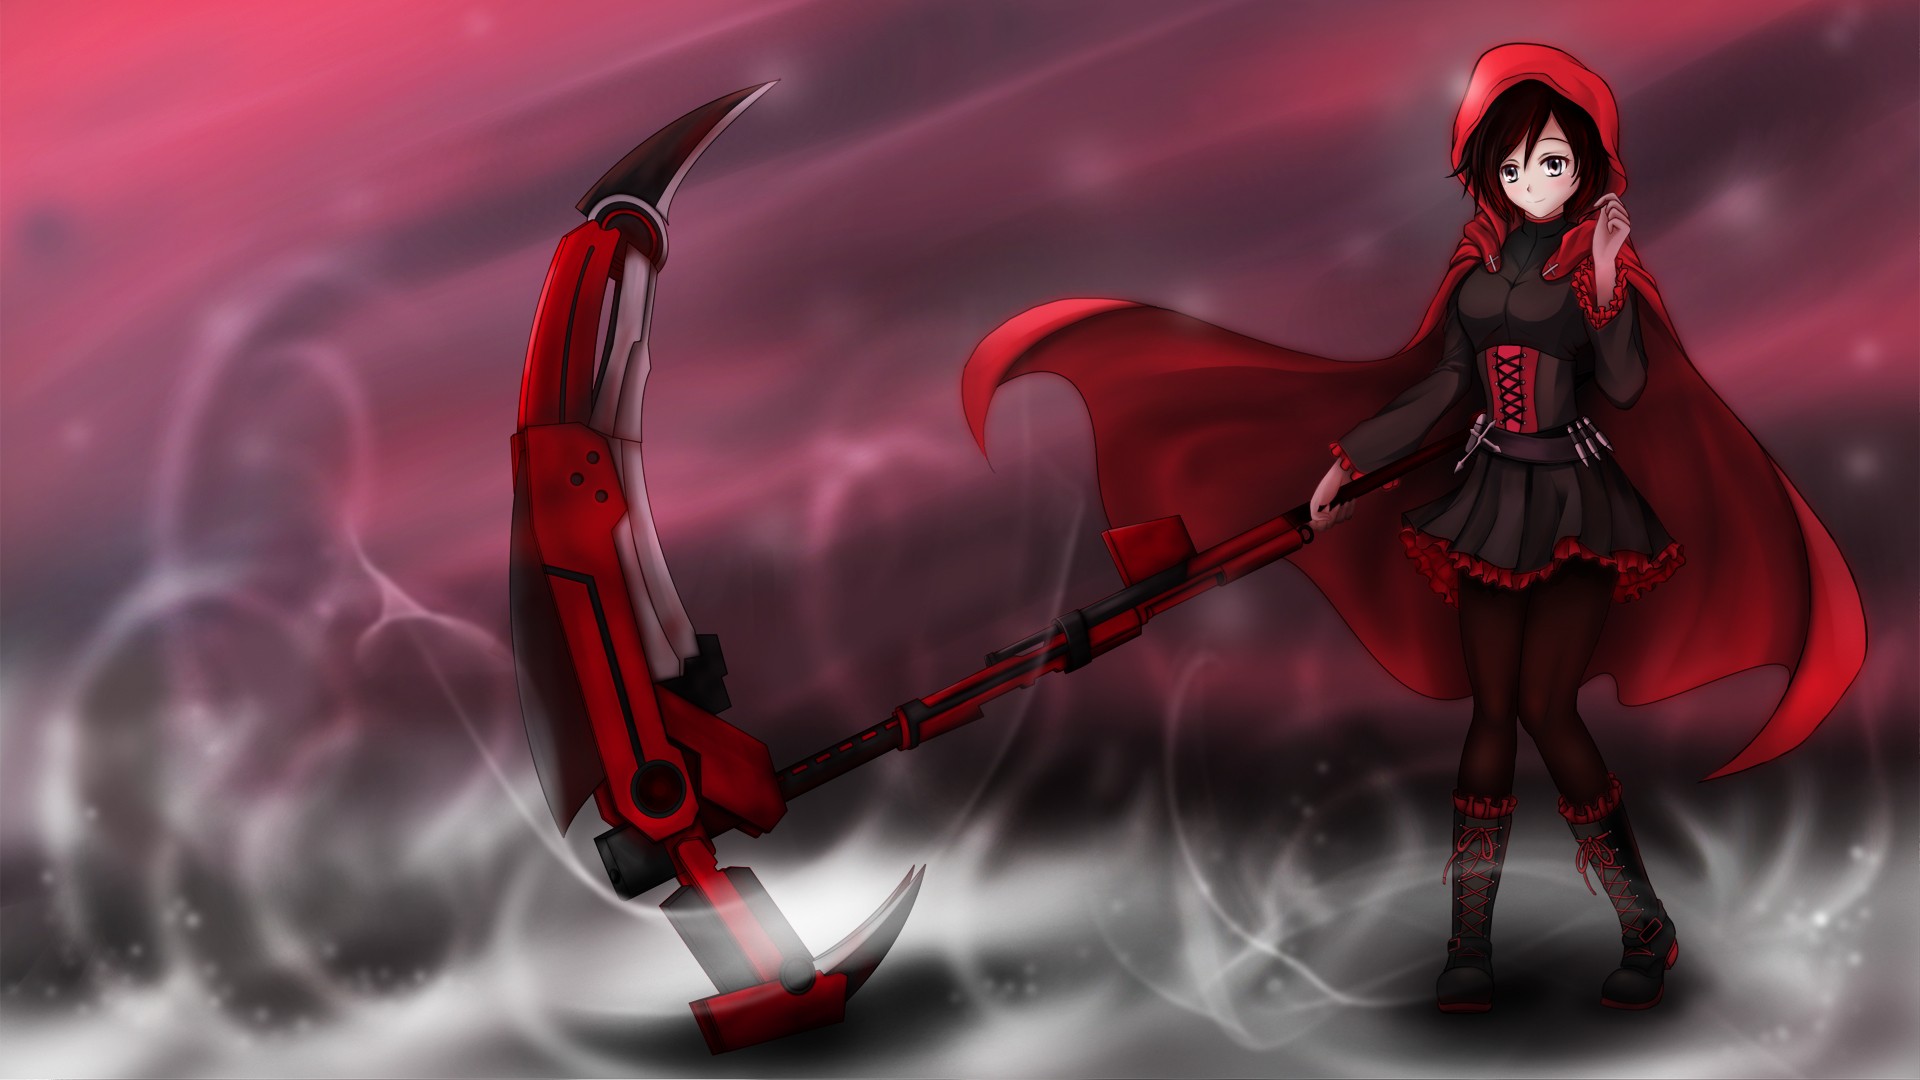 Ruby Rose RWBY wallpaper ·① Download free beautiful wallpapers for